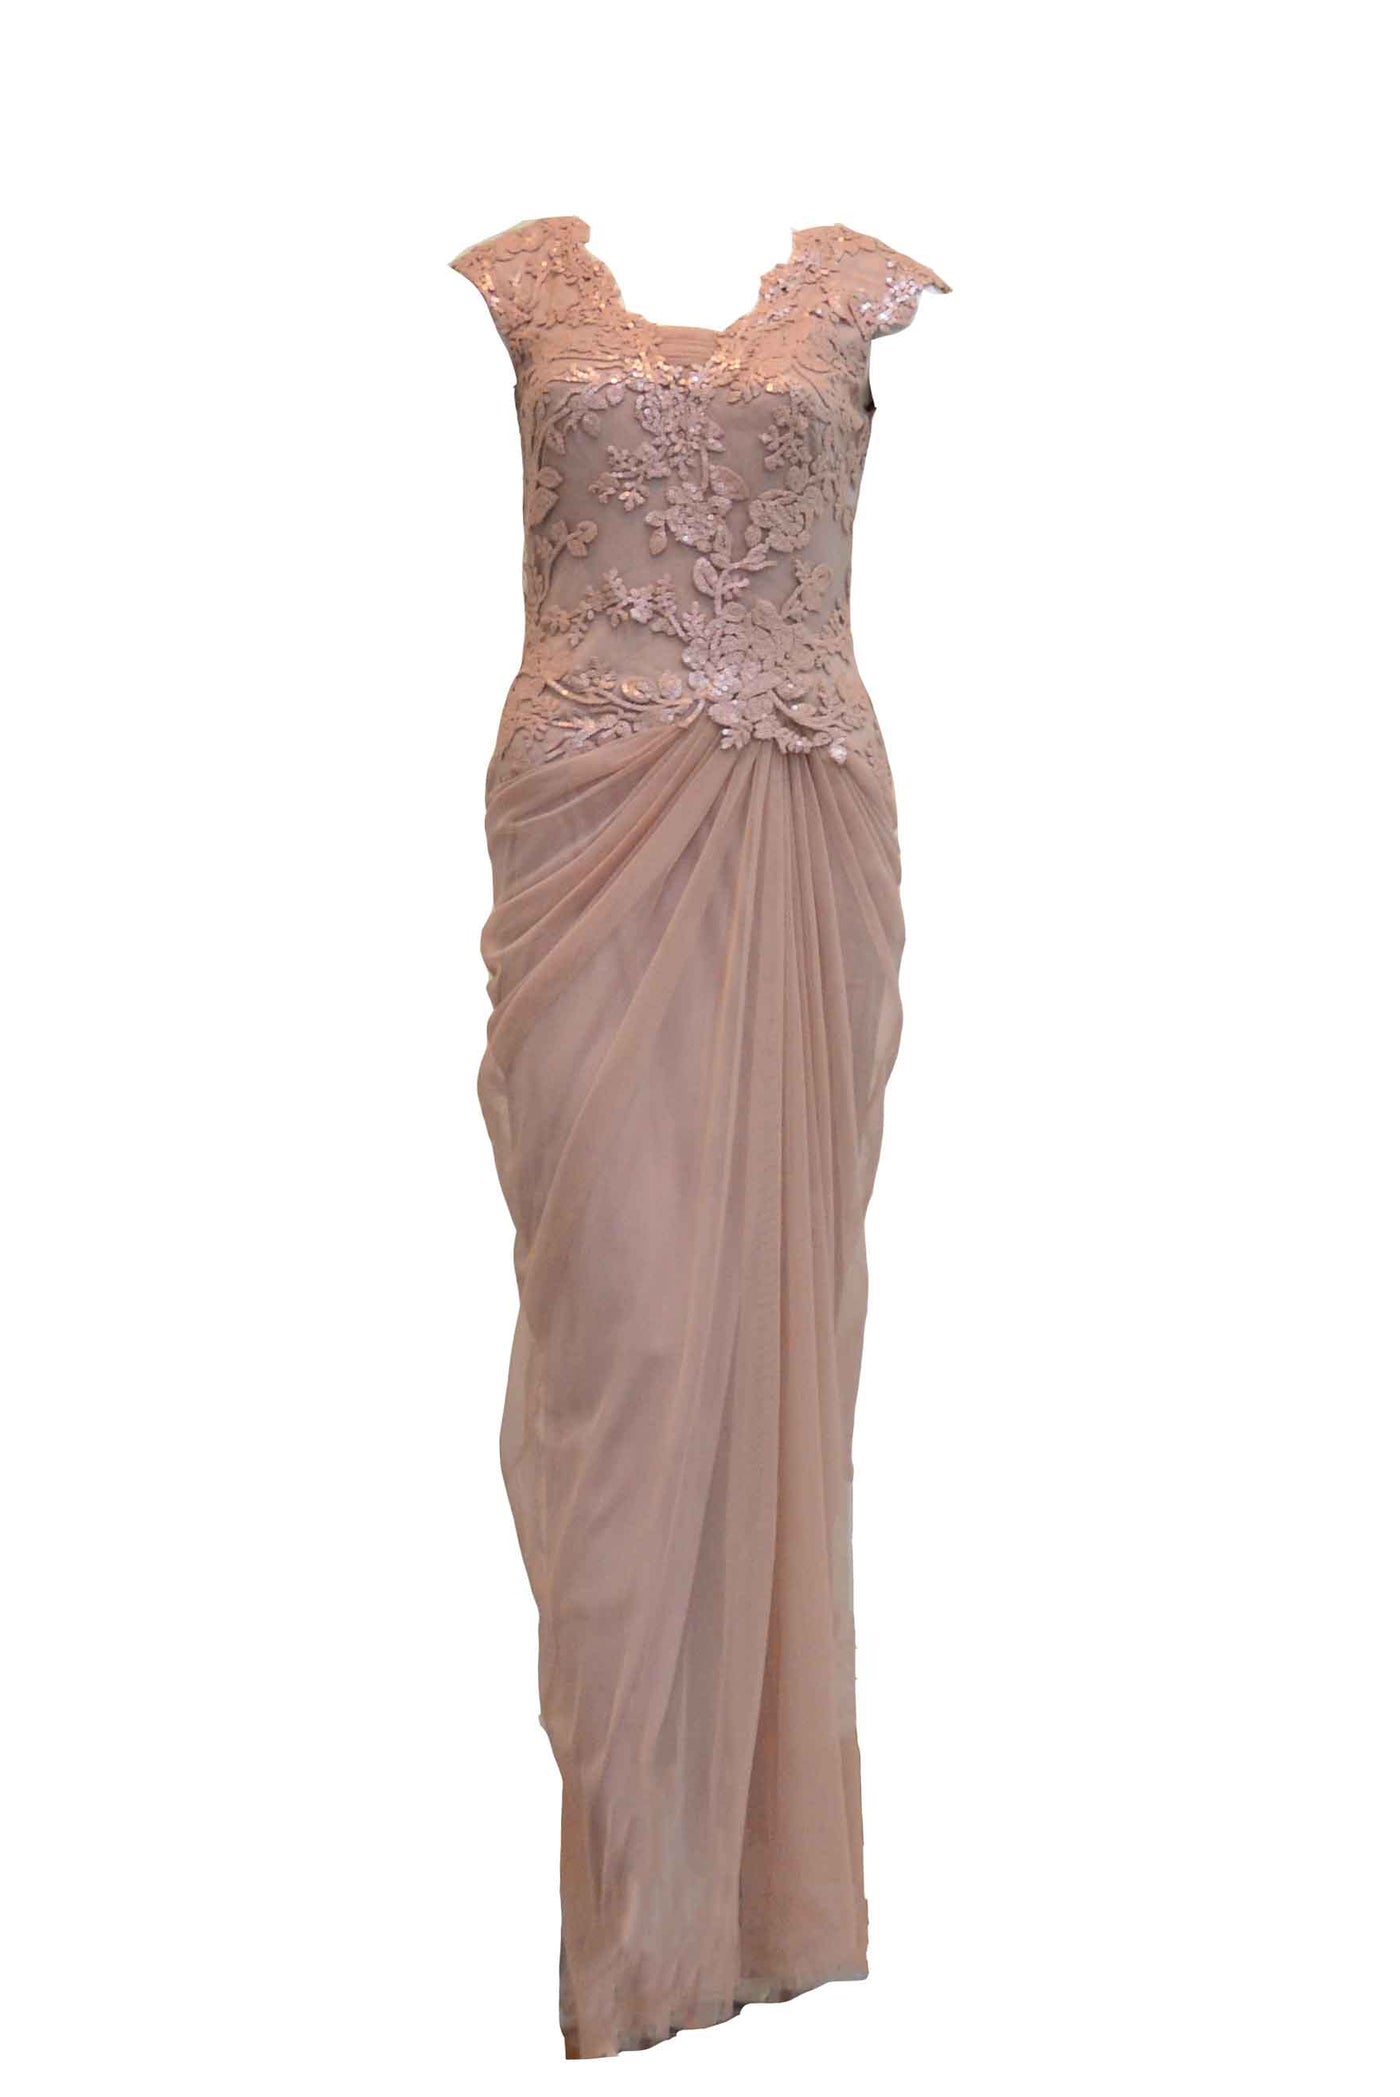 Rent: Tadashi Shoji - Dusty Pink Tulle with Sequins Dress